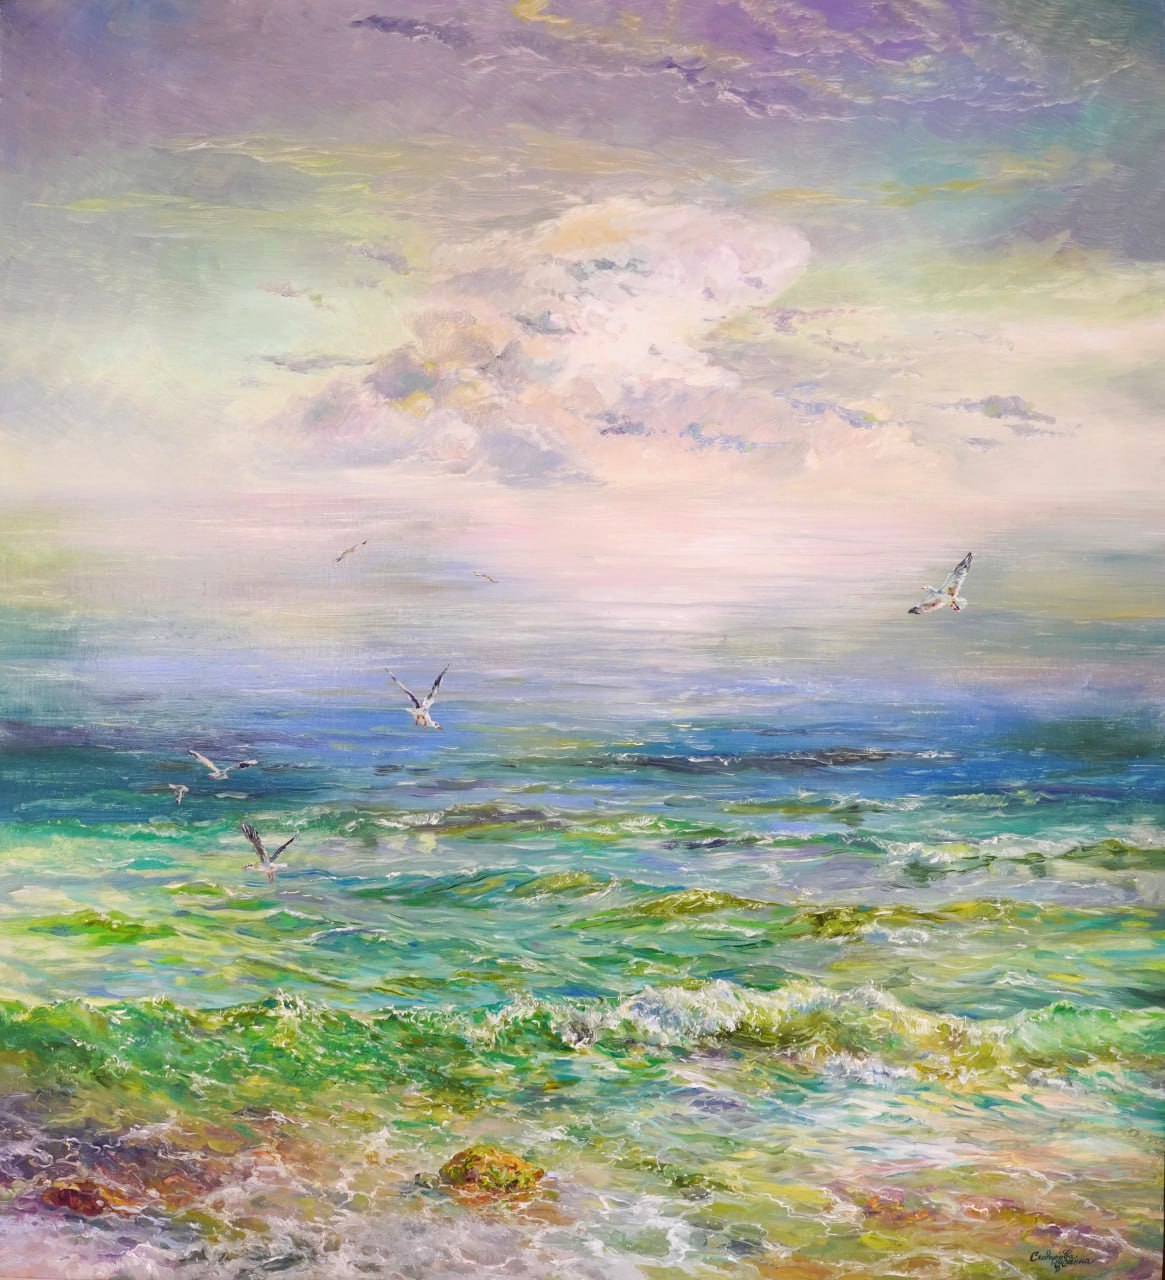 Sea View With Seagulls - 1, Zhanna Sidorova, Buy the painting Oil